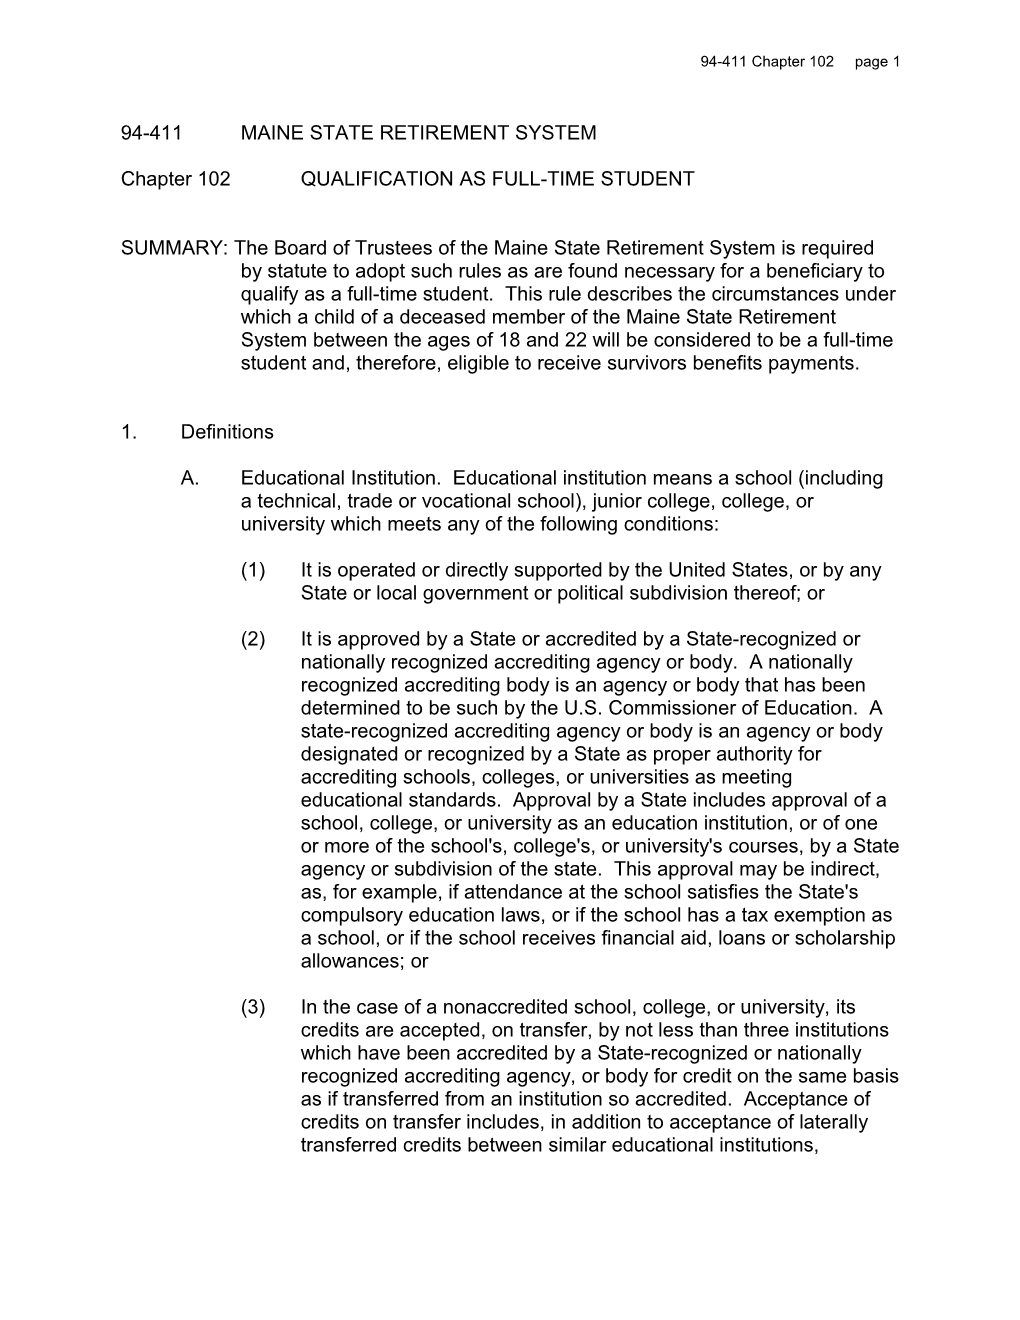 Chapter 102QUALIFICATION AS FULL-TIME STUDENT